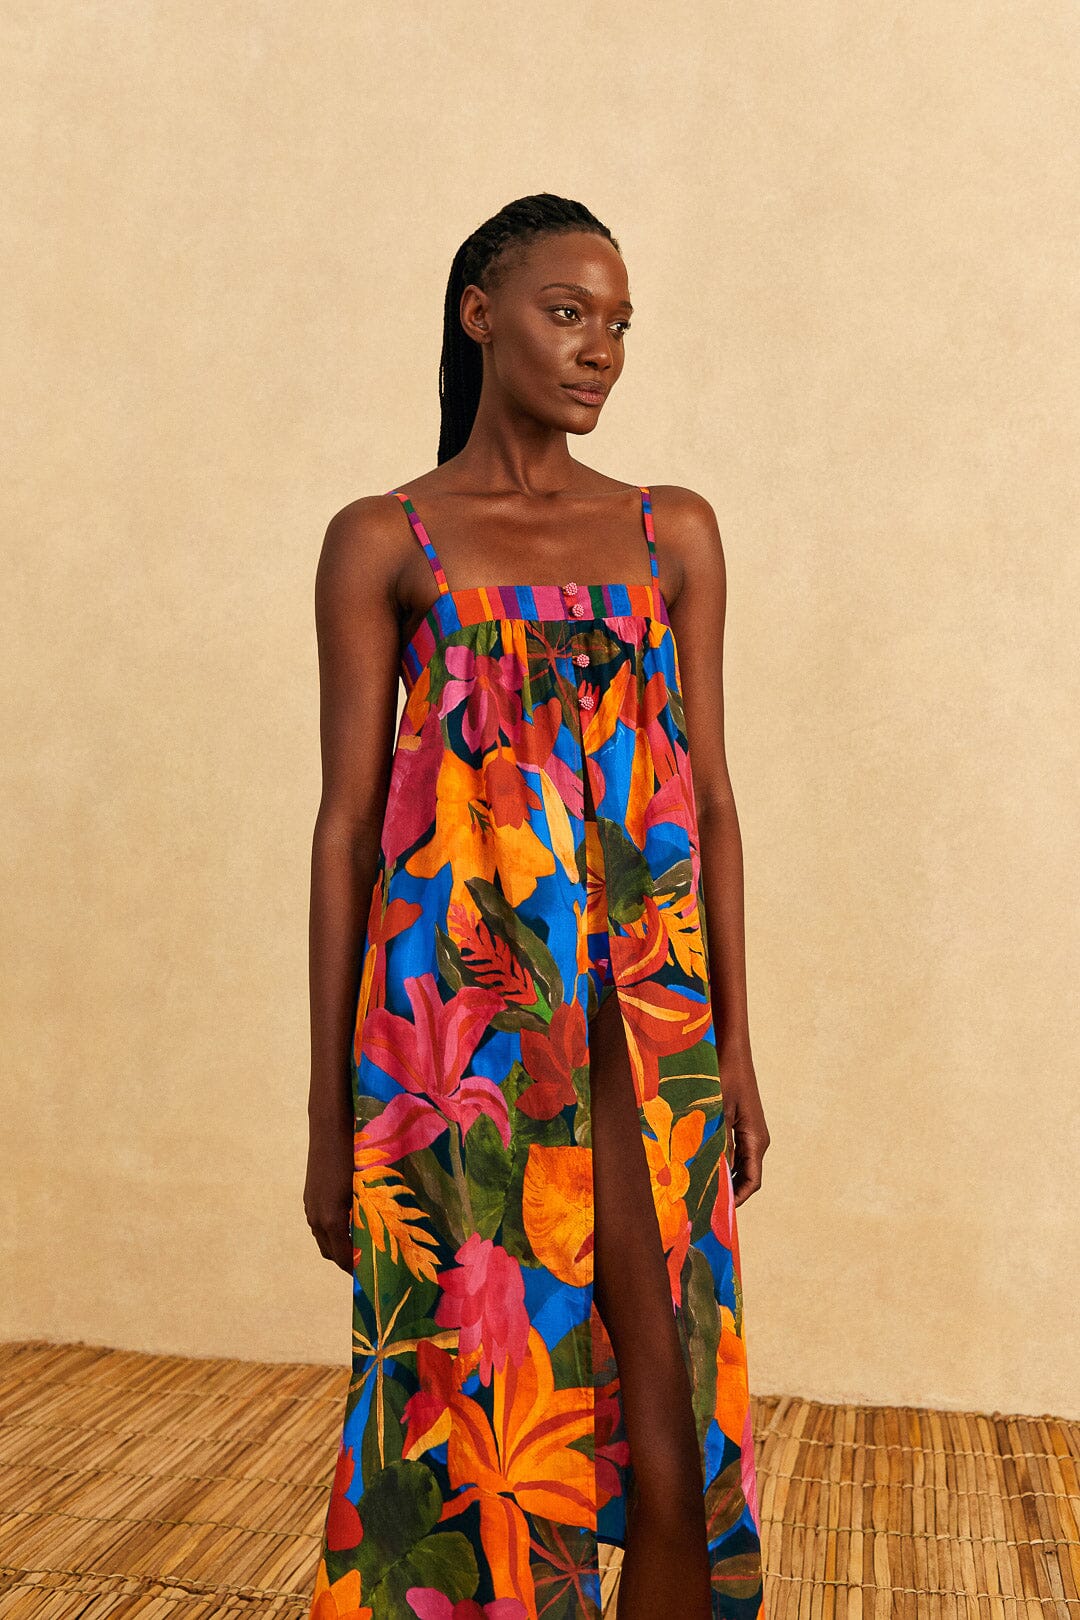 Blue Floral Tropical & Colorful Stripes Cover-Up